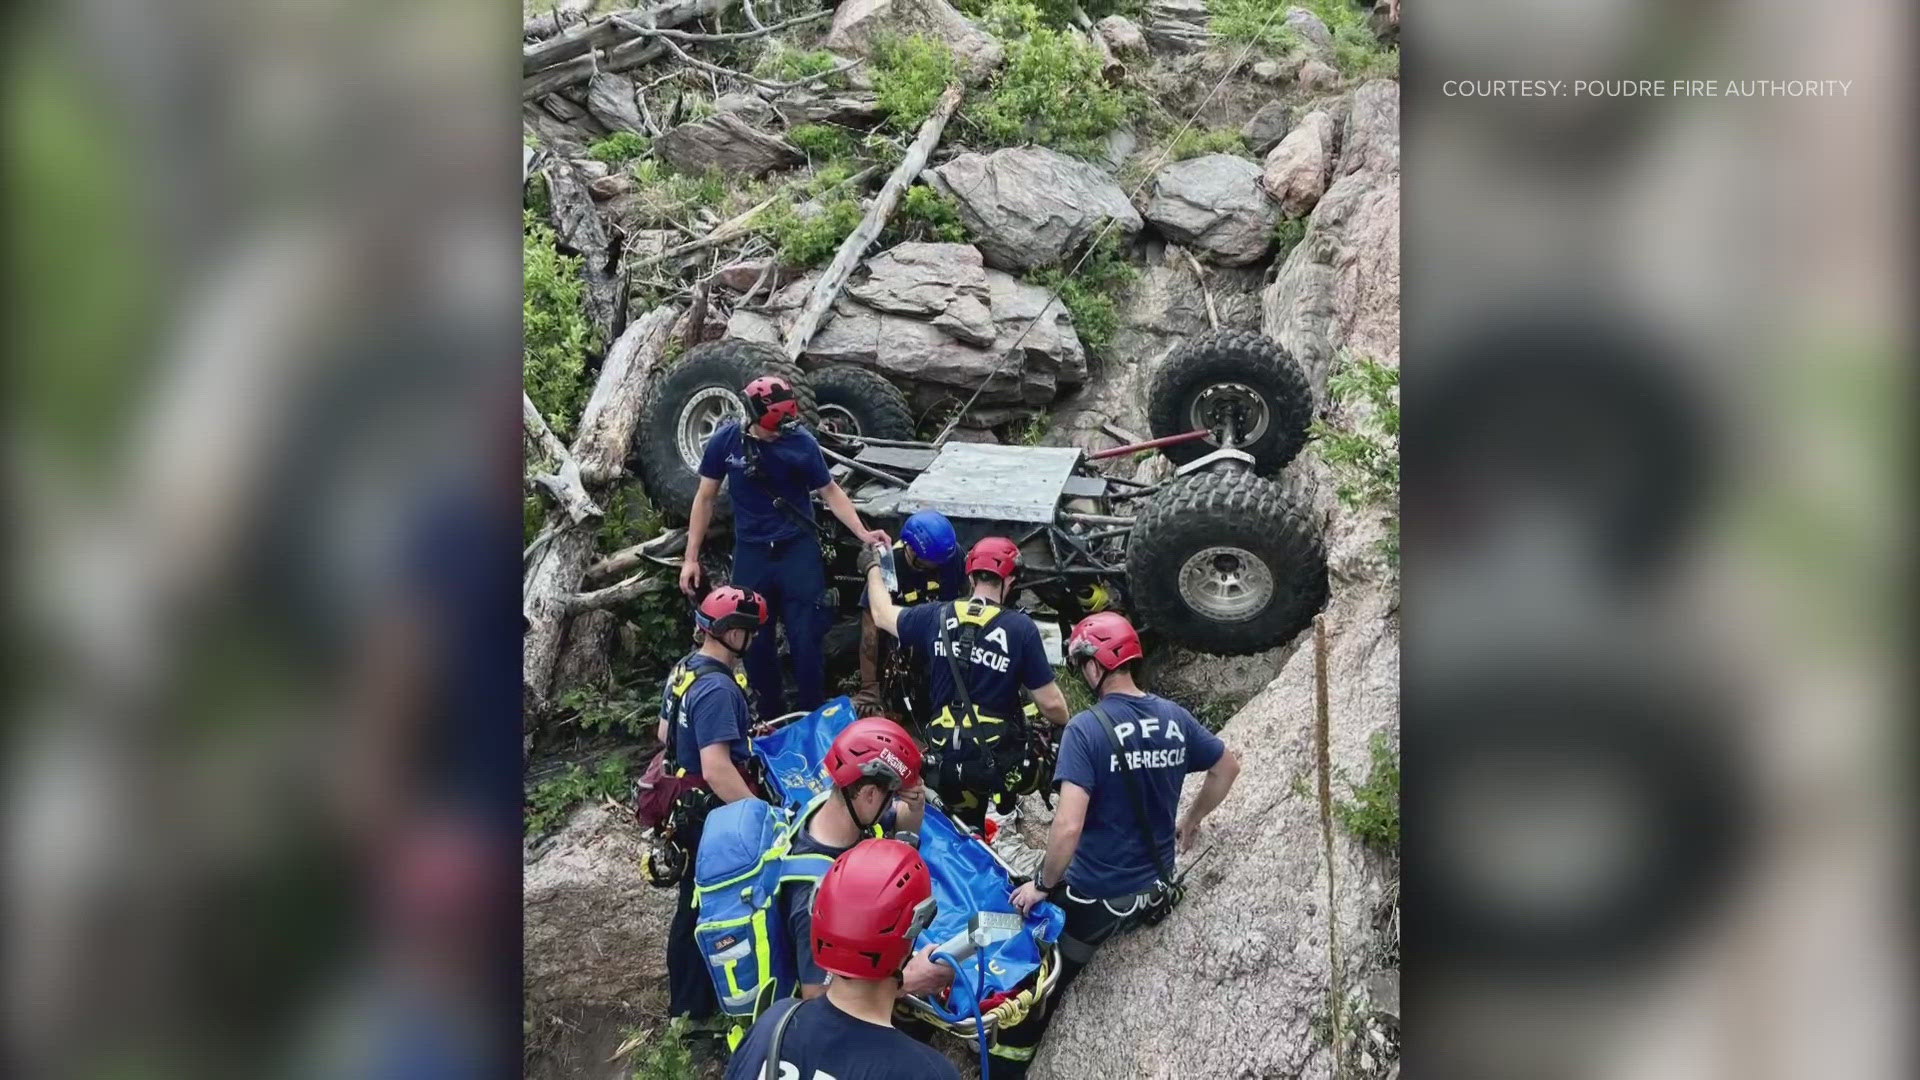 Poudre Fire Authority said the person was flown to the hospital after a four-hour rescue operation in a remote location.